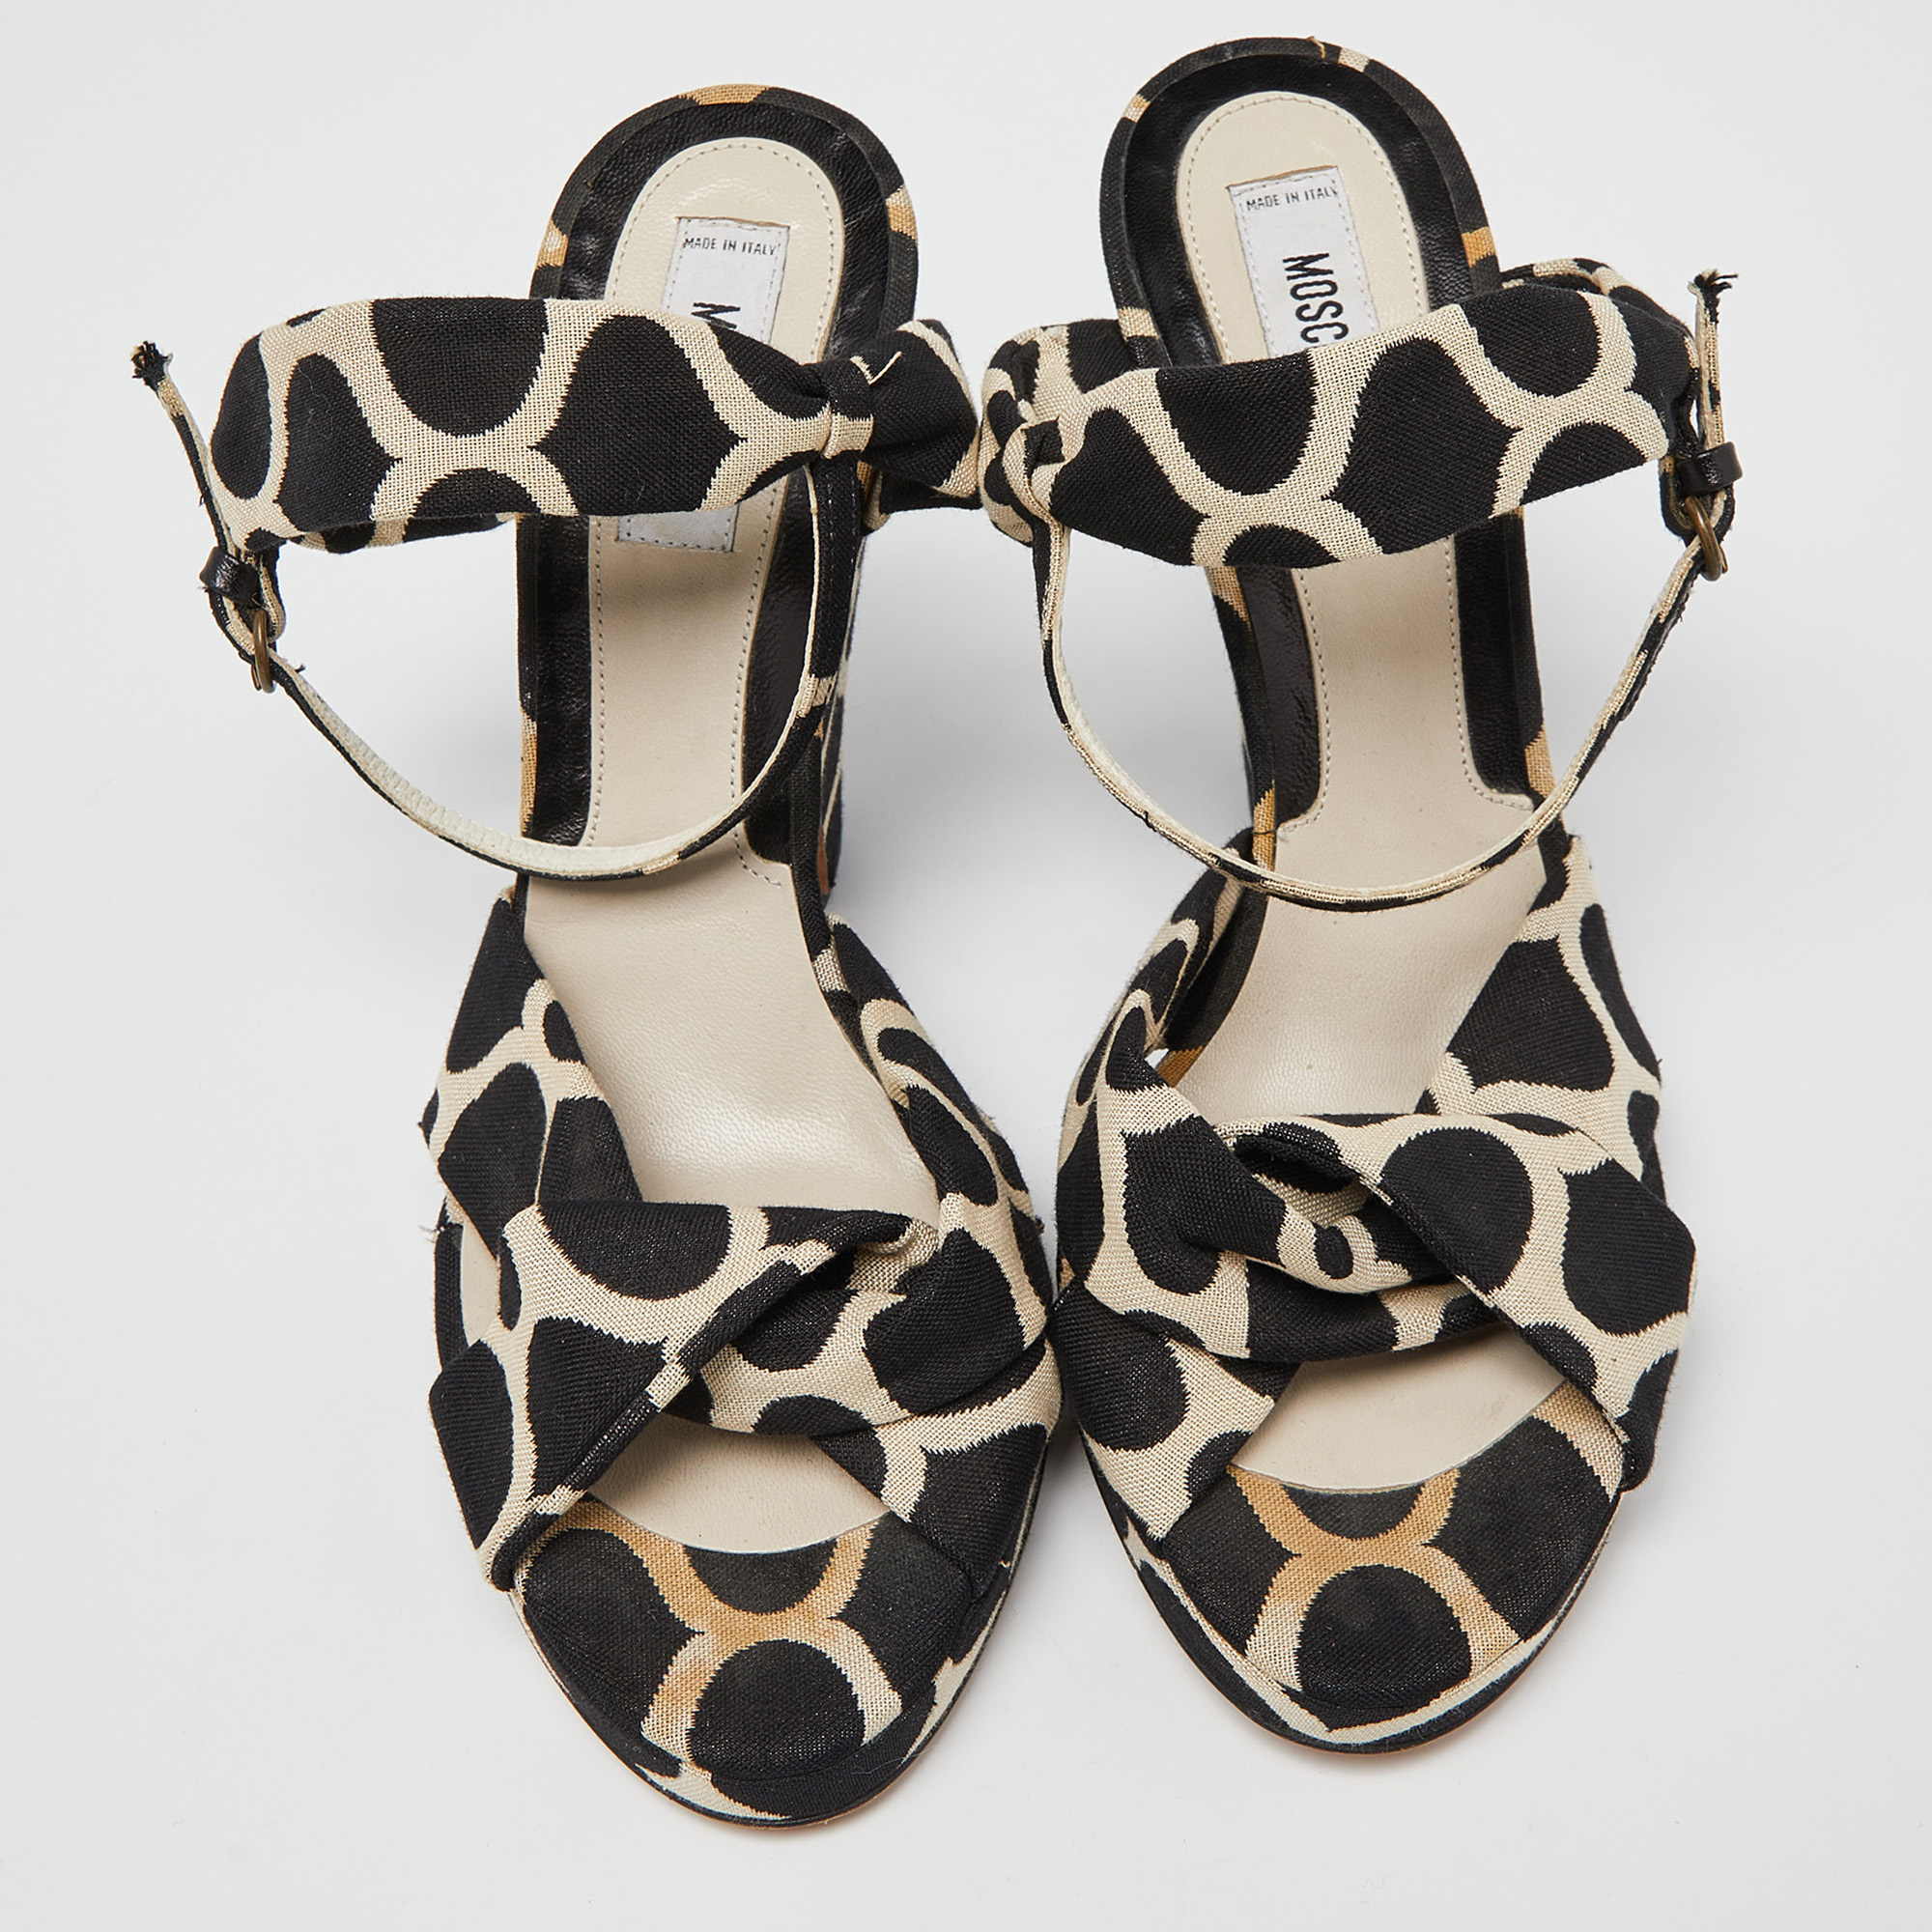 Moschino Black/White Printed Canvas Ankle Strap Sandals Size 38